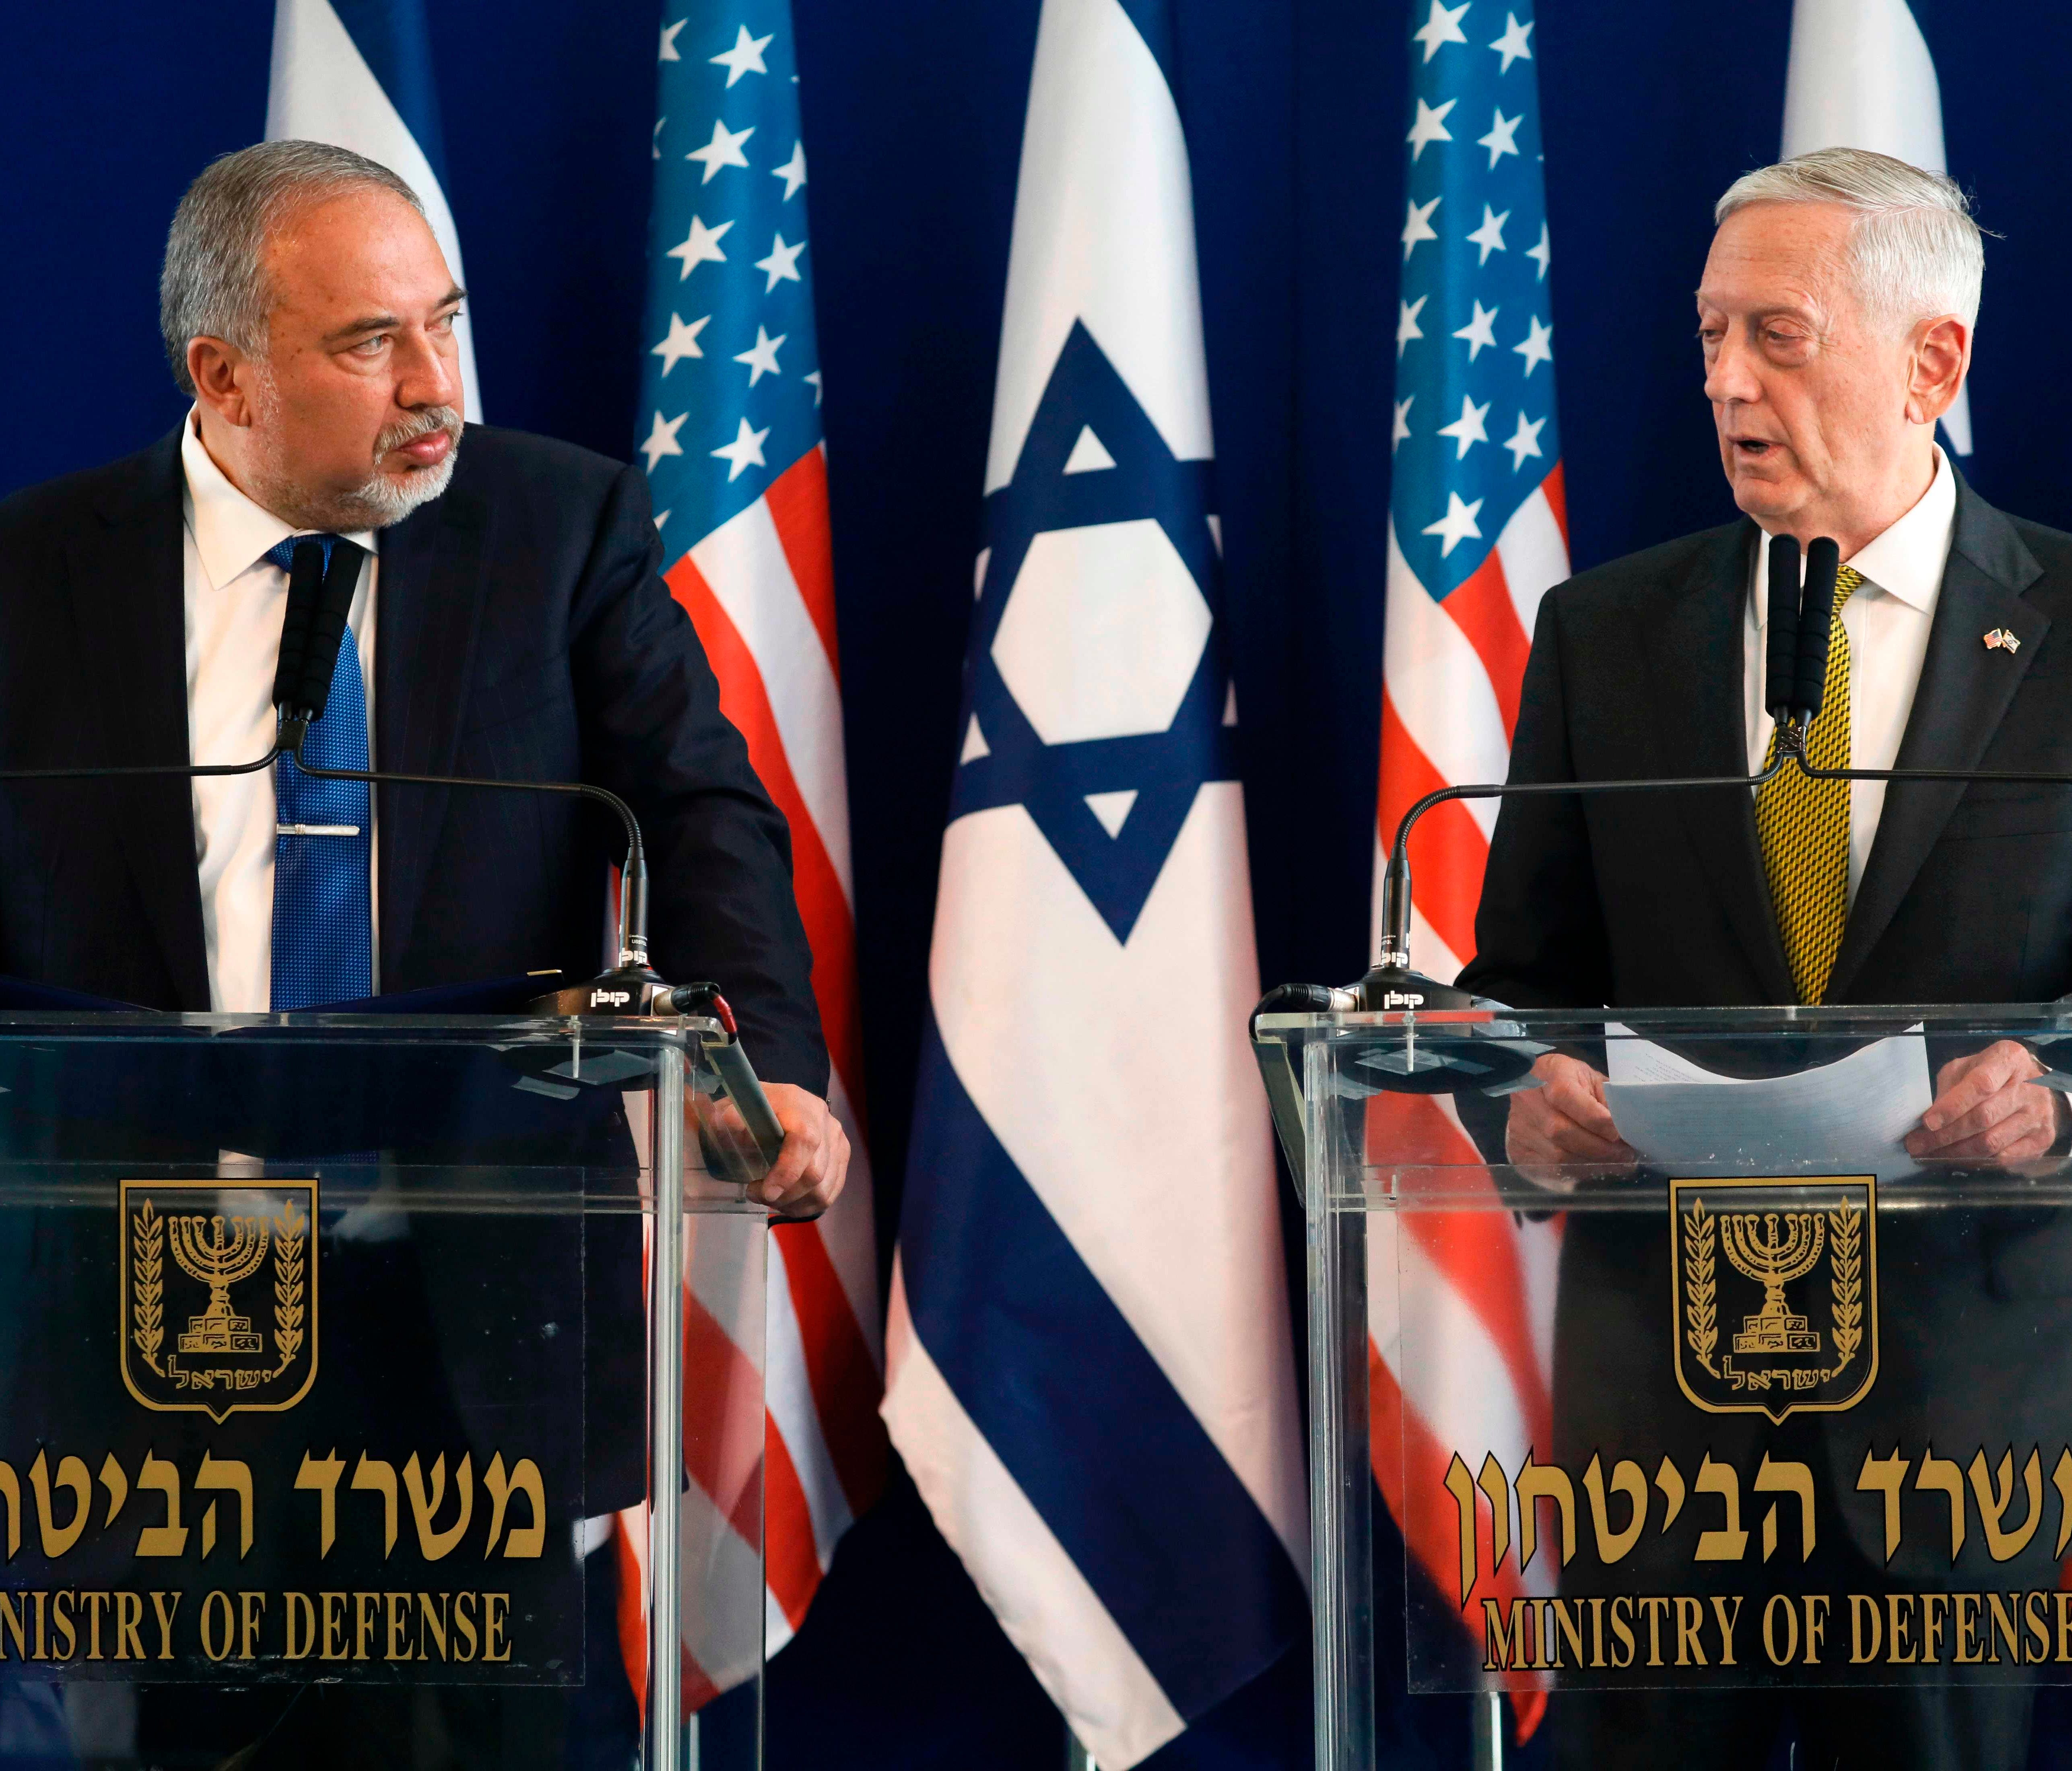 Israeli Defence Minister Avigdor Lieberman and Defence Secretary James Mattis give a joint press conference at the Ministry of Defence in Tel Aviv on April 21, 2017.